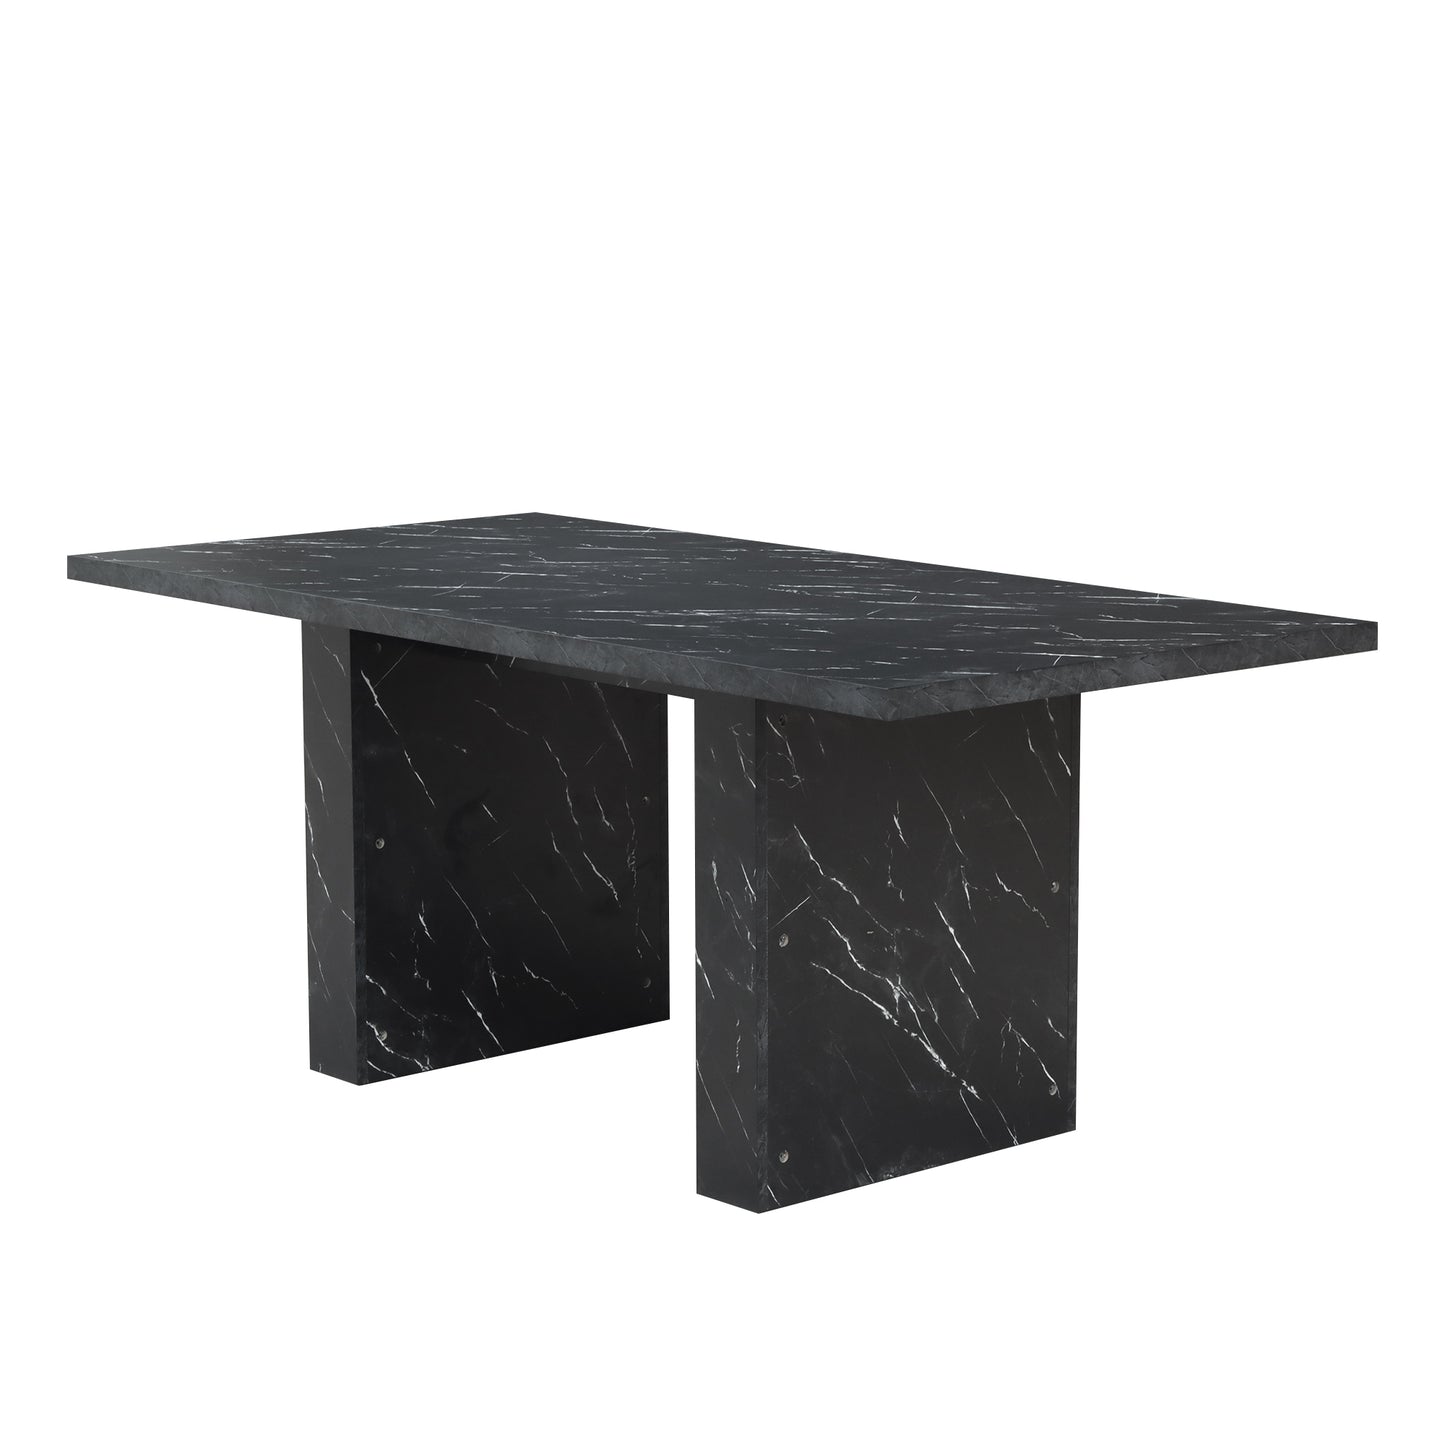 Dining furniture - High end dining table